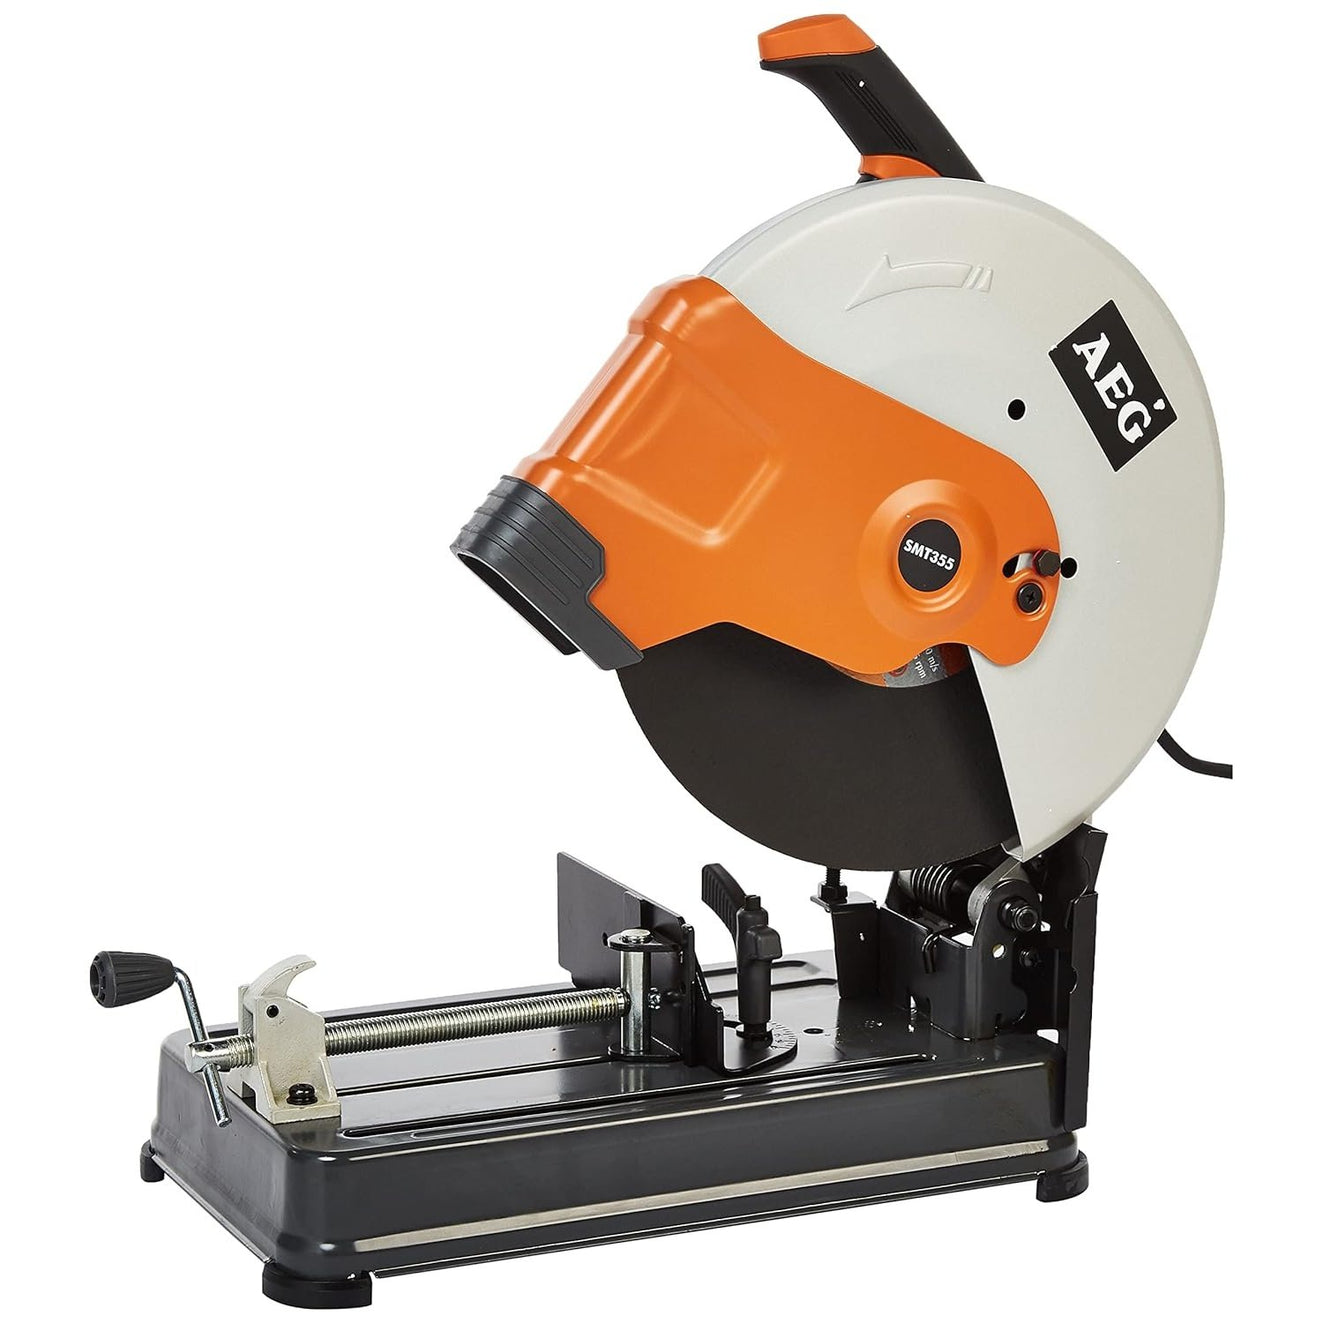 AEG 14"/355mm Cut-Off Chop Saw 2300W - SMT355 | Supply Master | Accra, Ghana Bench & Stationary Tool Buy Tools hardware Building materials